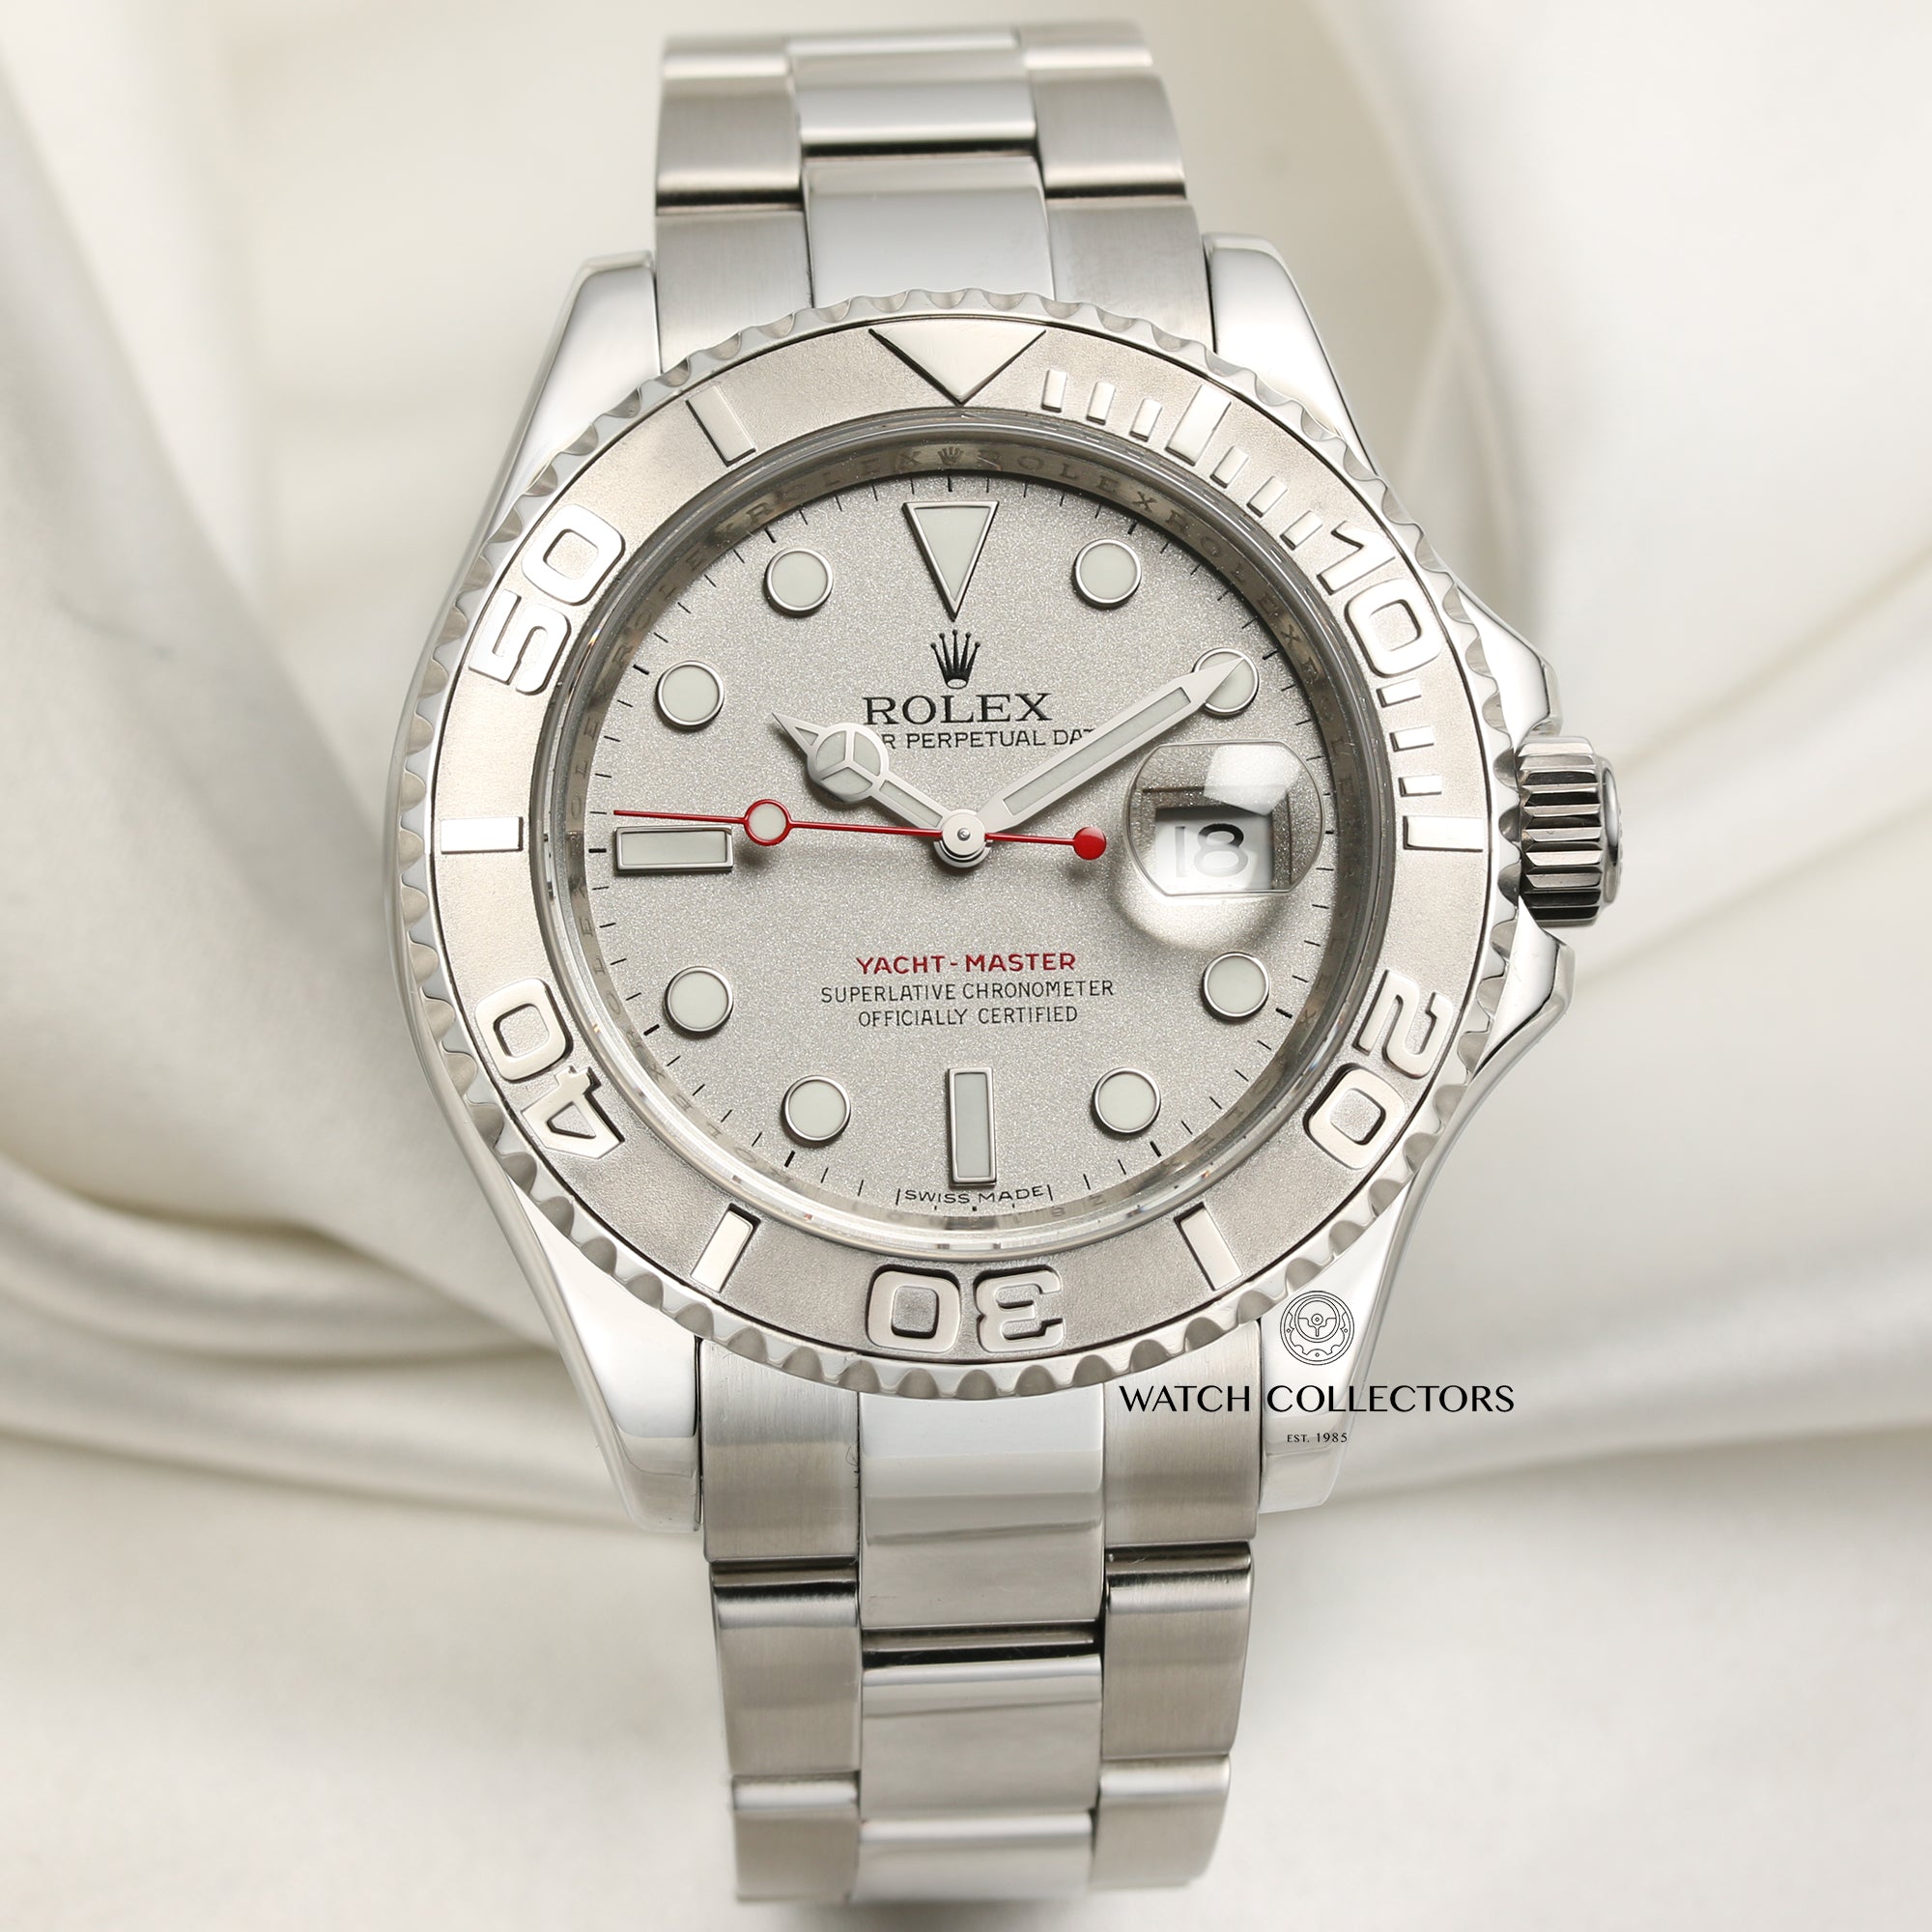 Rolex Yacht-Master 16622, 40mm, Platinum Dial, Steel, Pre-Owned